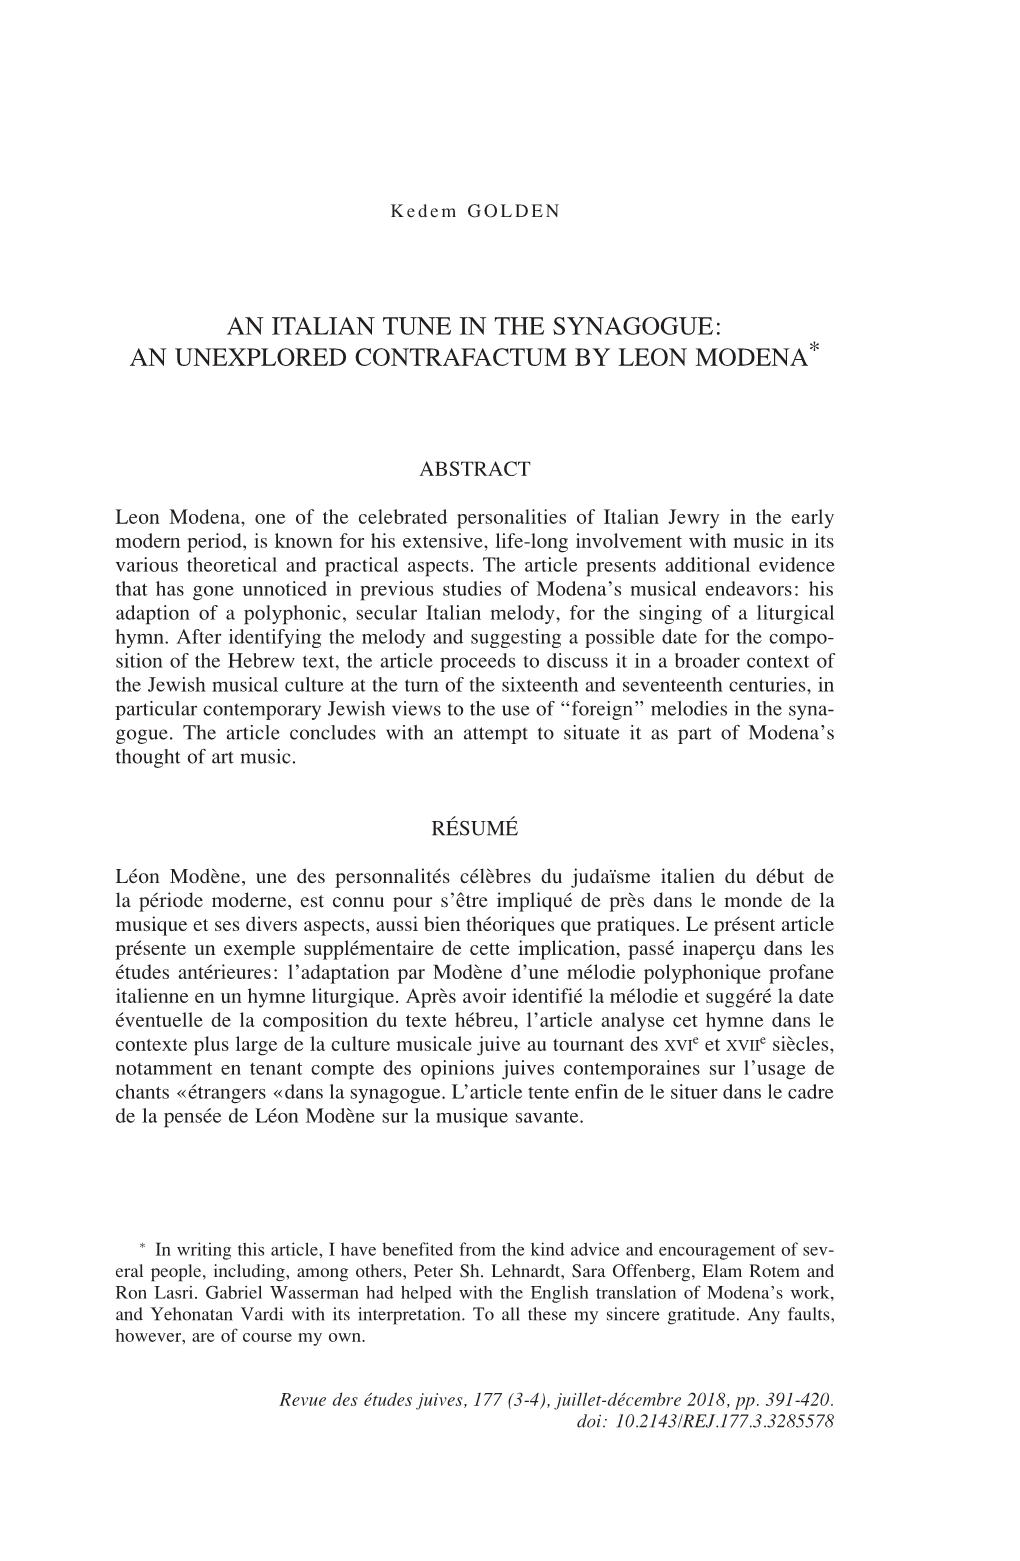 An Italian Tune in the Synagogue: an Unexplored Contrafactum by Leon Modena∗